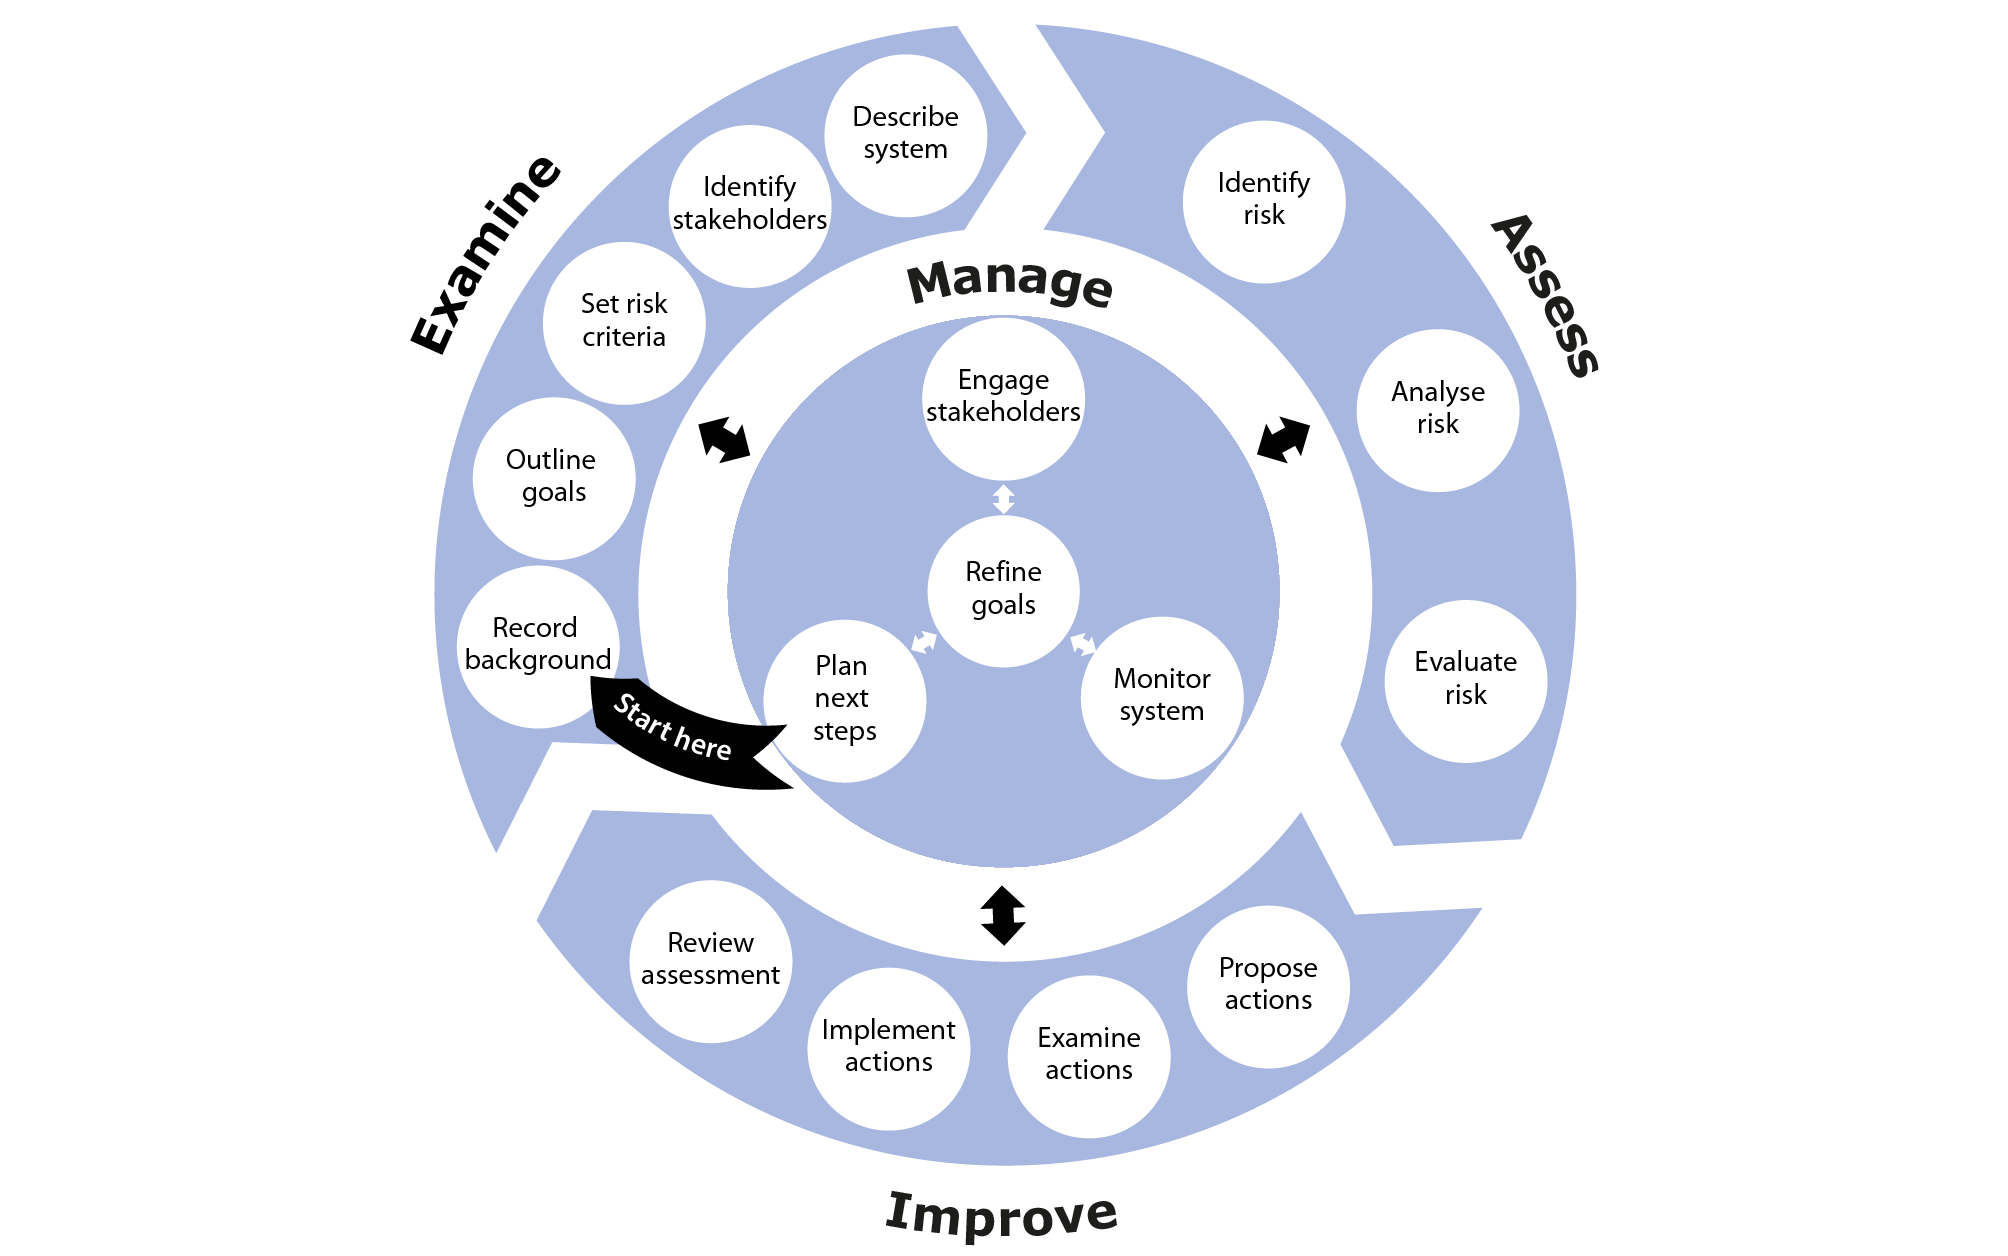 Diagram showing the key activities in an SSA and which phase of the process they belong to. The Examine phase involves Record background, Outine goals, Set risk criteria, Identify stakeholders, and Describe system. Assess involves Identify risk, Analyse risk and Evaluate risk. Improve involves Propose actions, Detail actions, Implement actions and Review assessment. Manage involves Plan next steps, Refine the goals, Engage stakeholders and Monitor system.